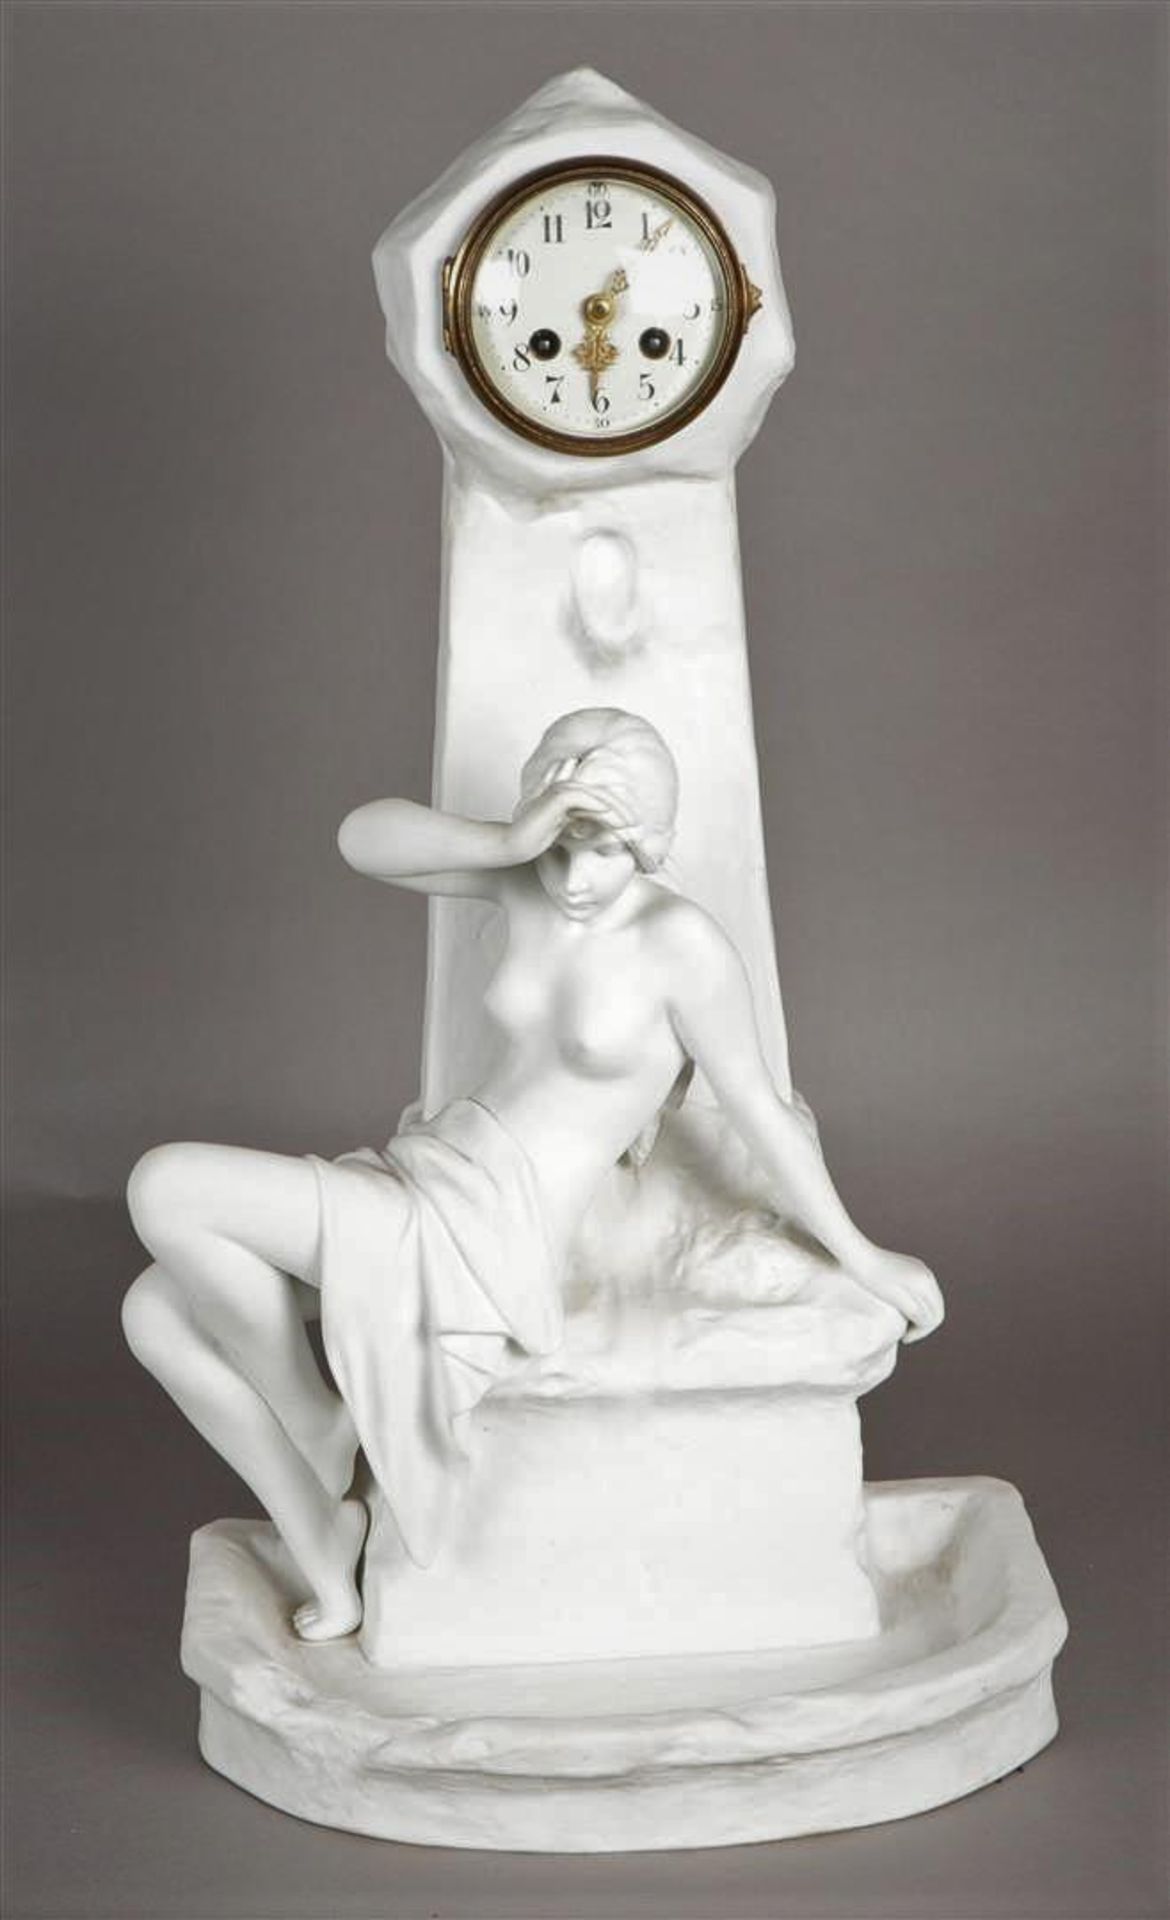 A biscuit Art Nouveau mantel clock, ca. 1900. (Not tested for long-term operation).